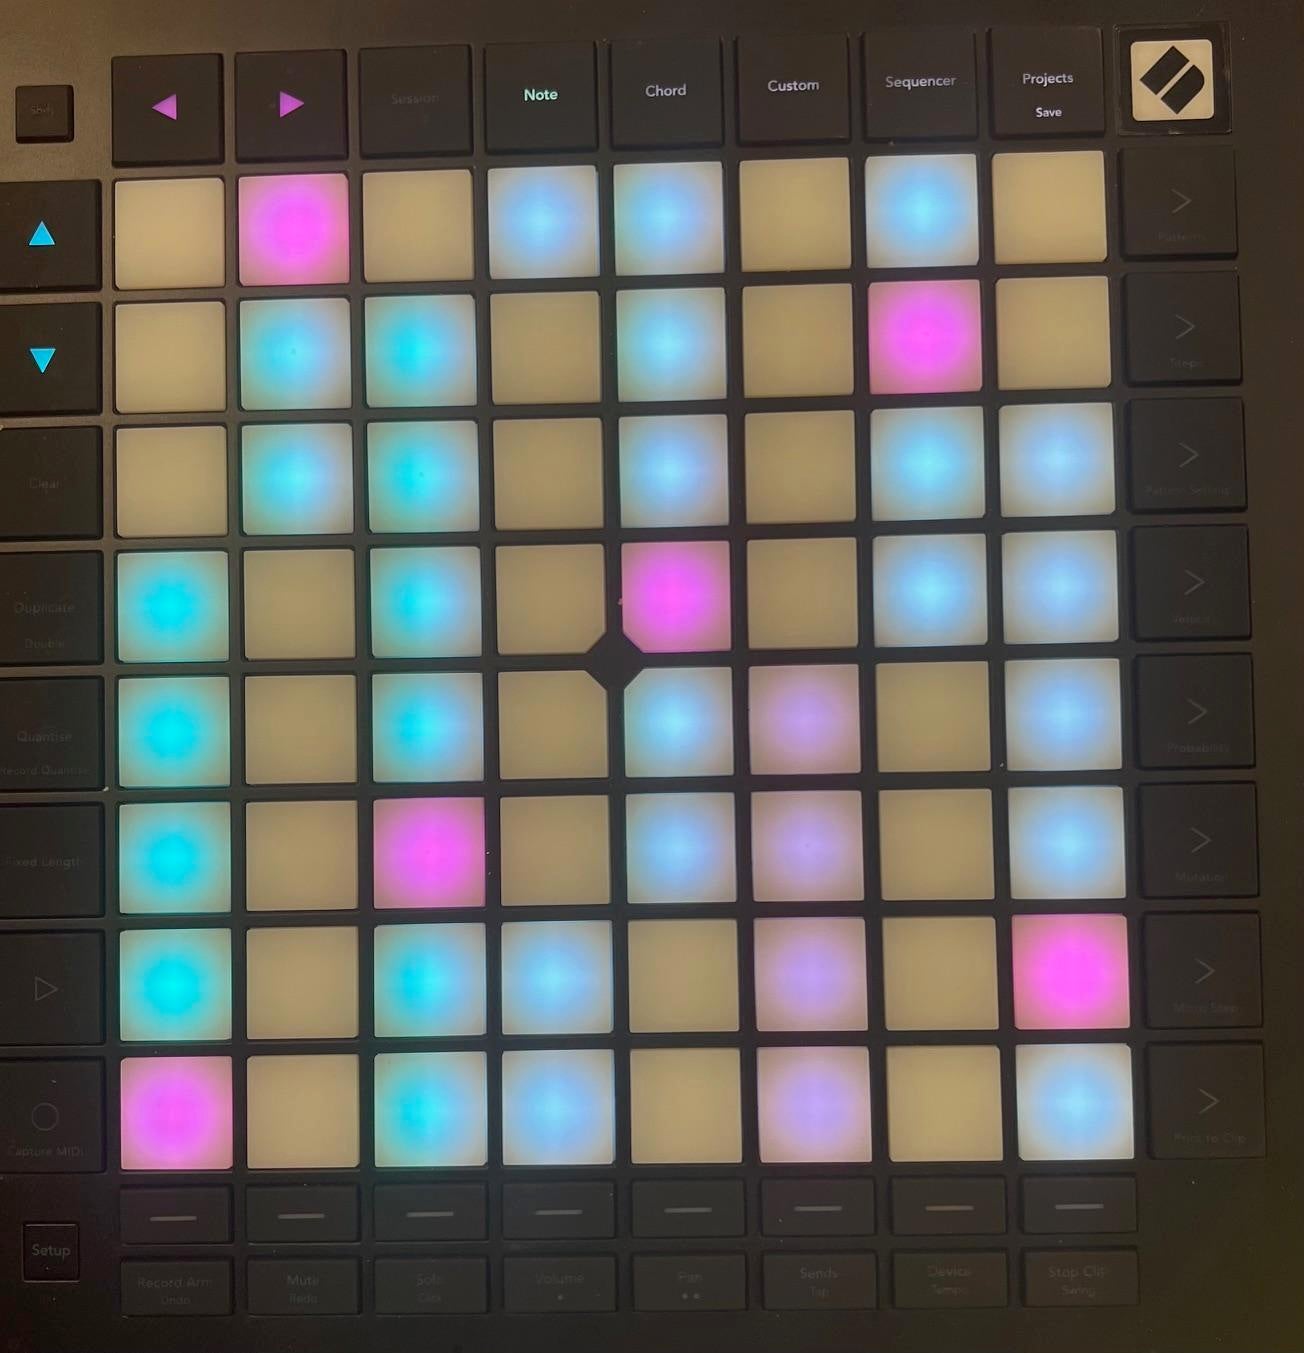 Used Novation Launchpad Pro MK 3 - Sweetwater's Gear Exchange